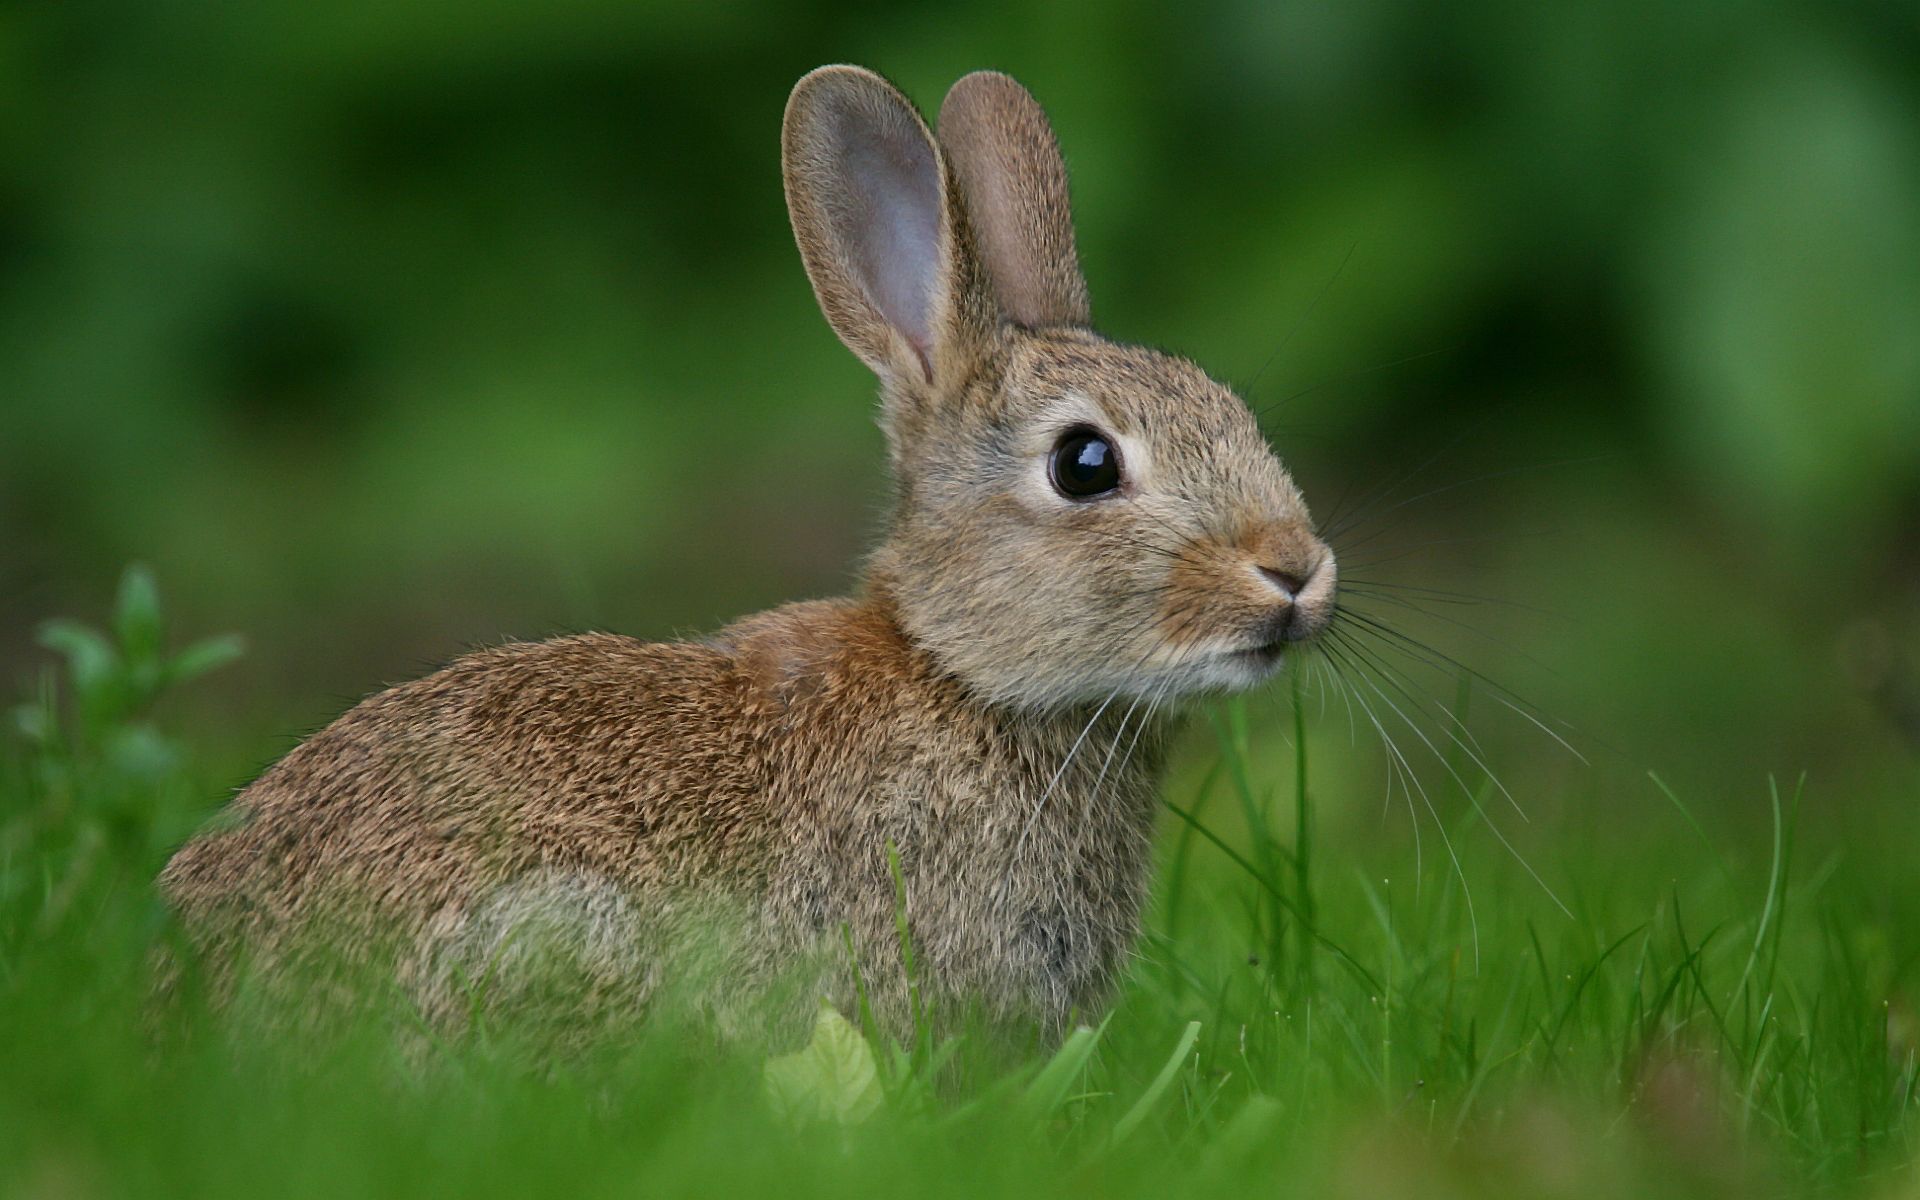 rabbit image high resolution. Rabbit meadow Wallpaper Picture